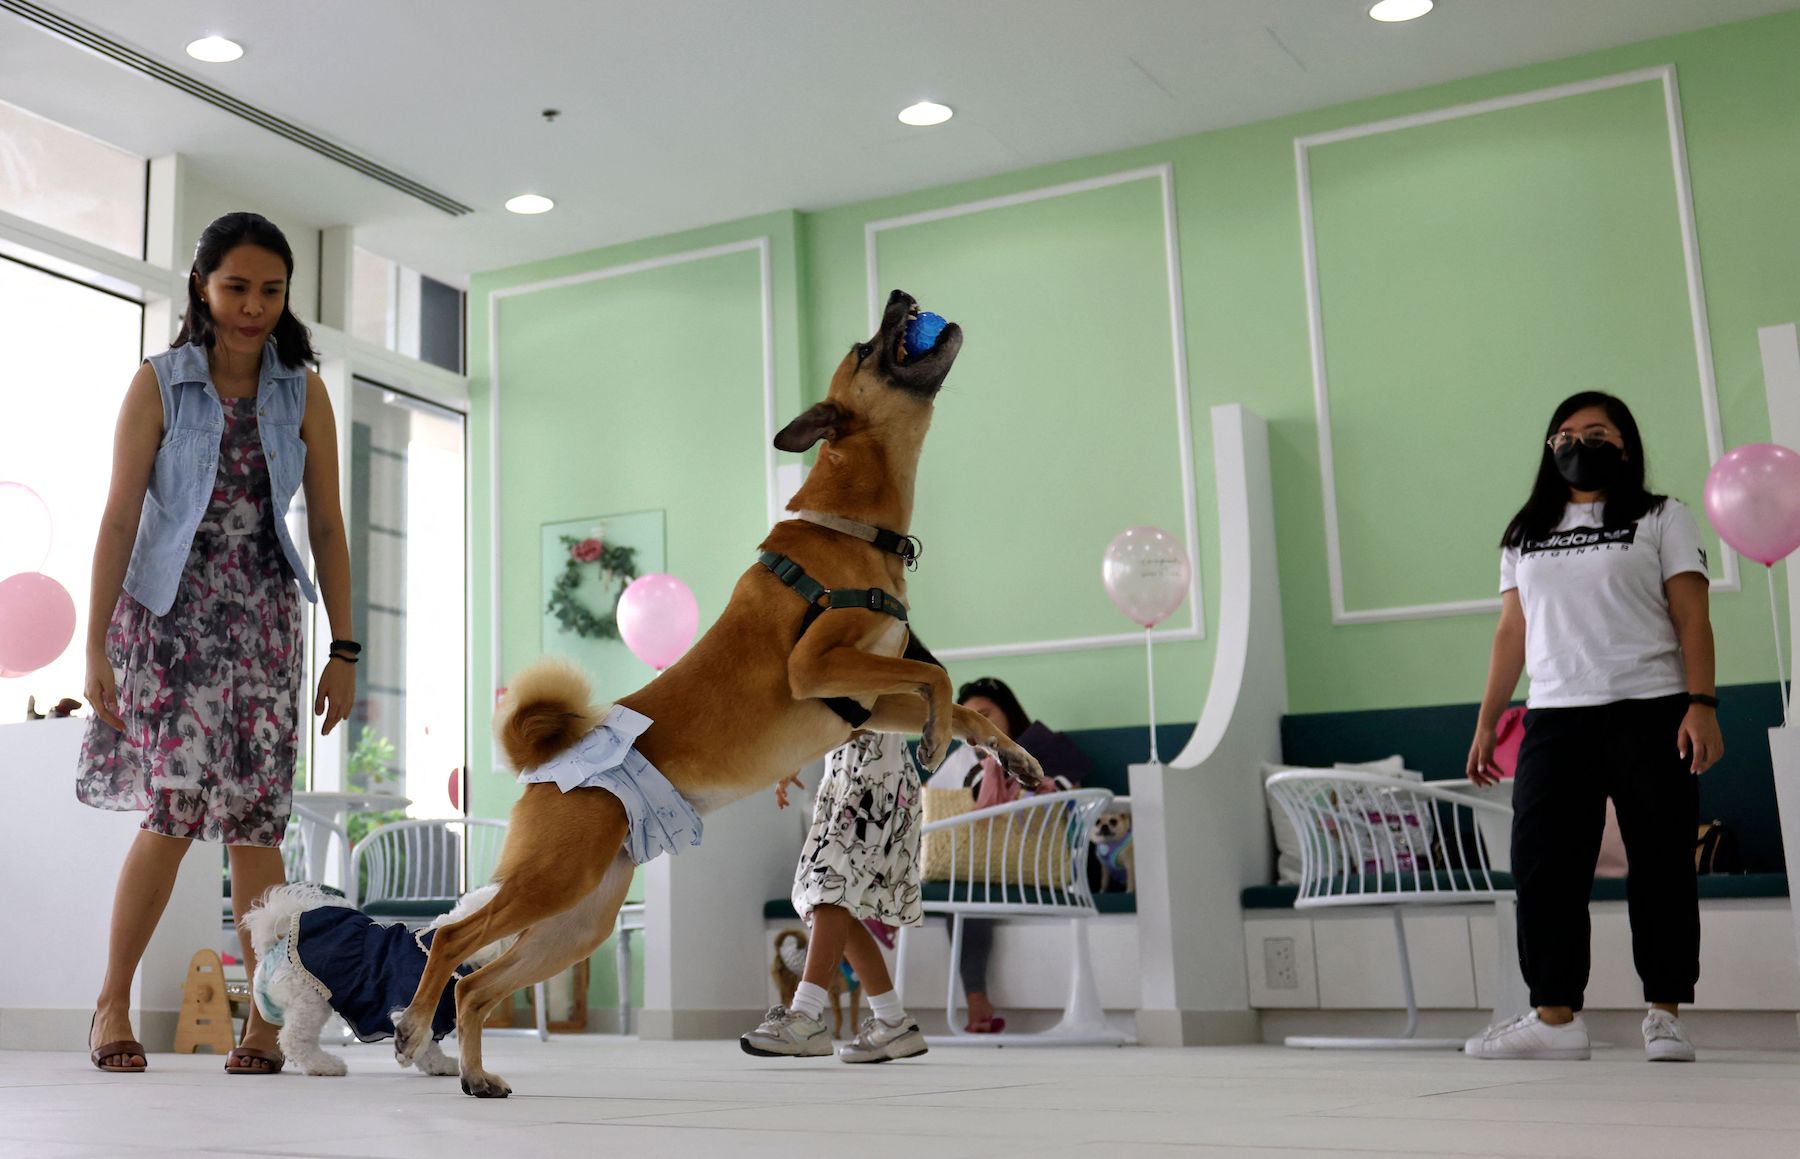 This South Korean Nutritionist Has Opened The First Healthy Dog And Cat Only Cafe In The UAE